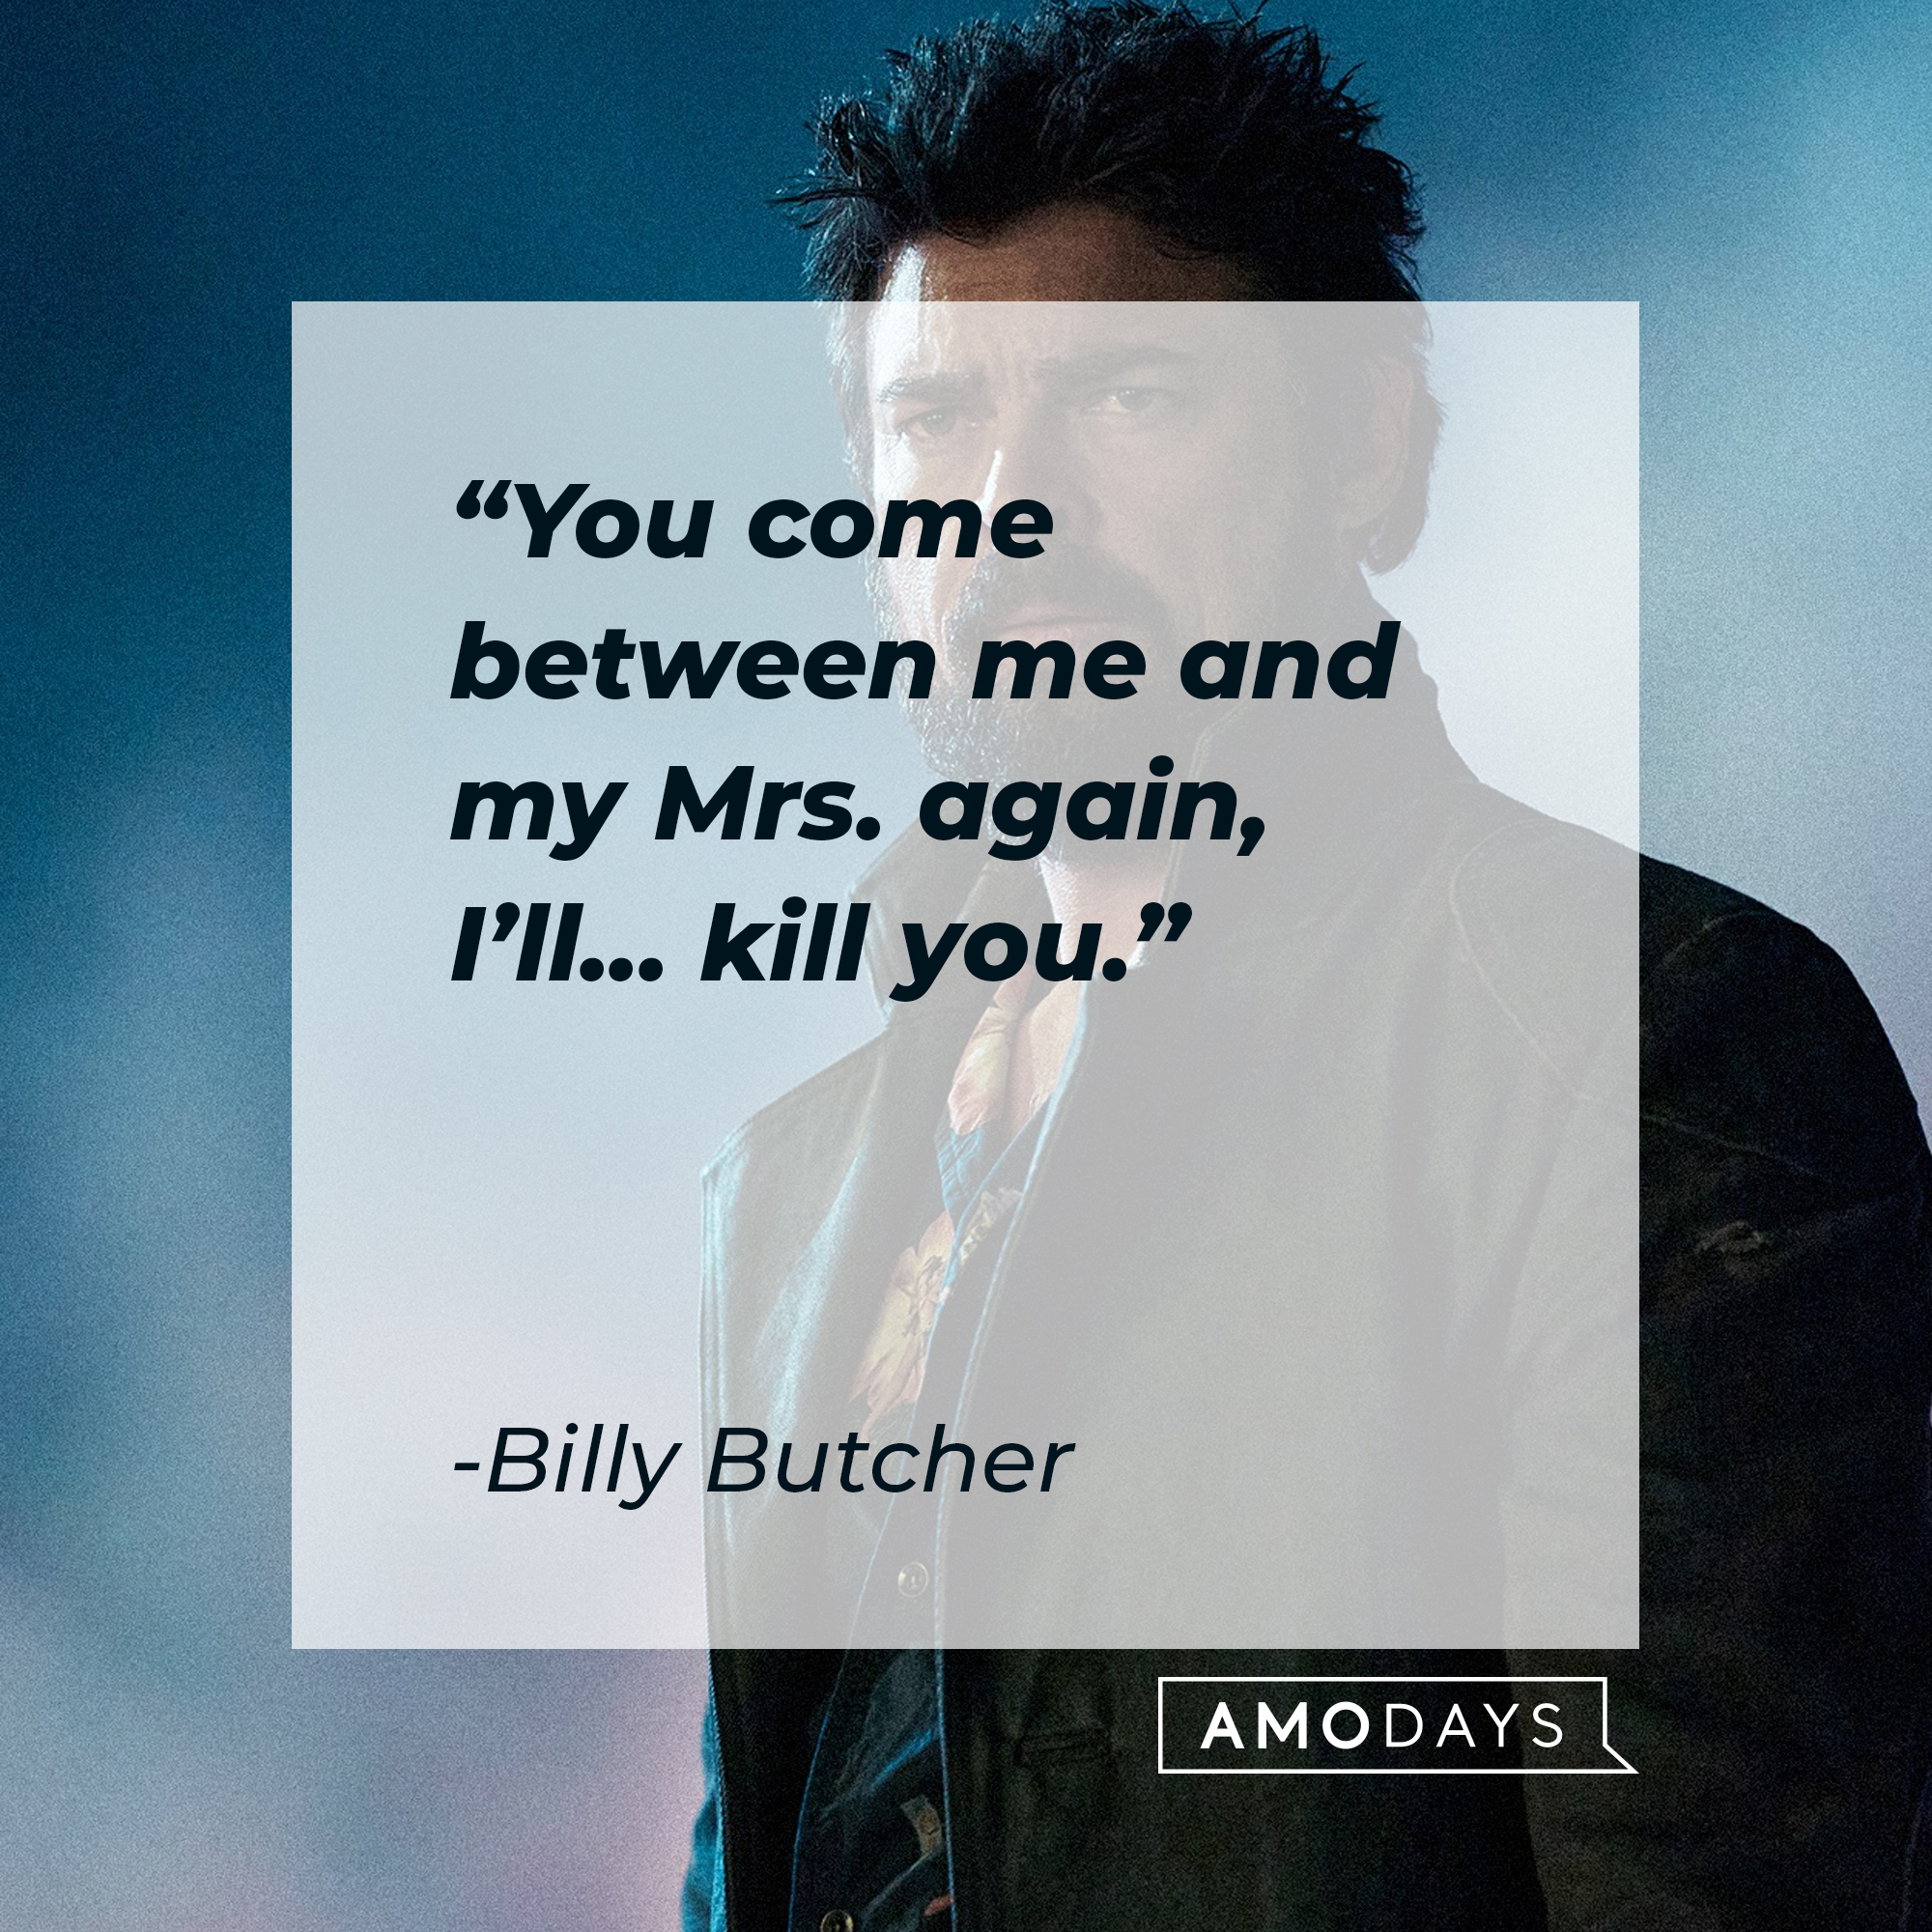 Billy Butcher's quote: "You come between me and my Mrs. again, I'll...kill you." | Source: Facebook.com/TheBoysTV